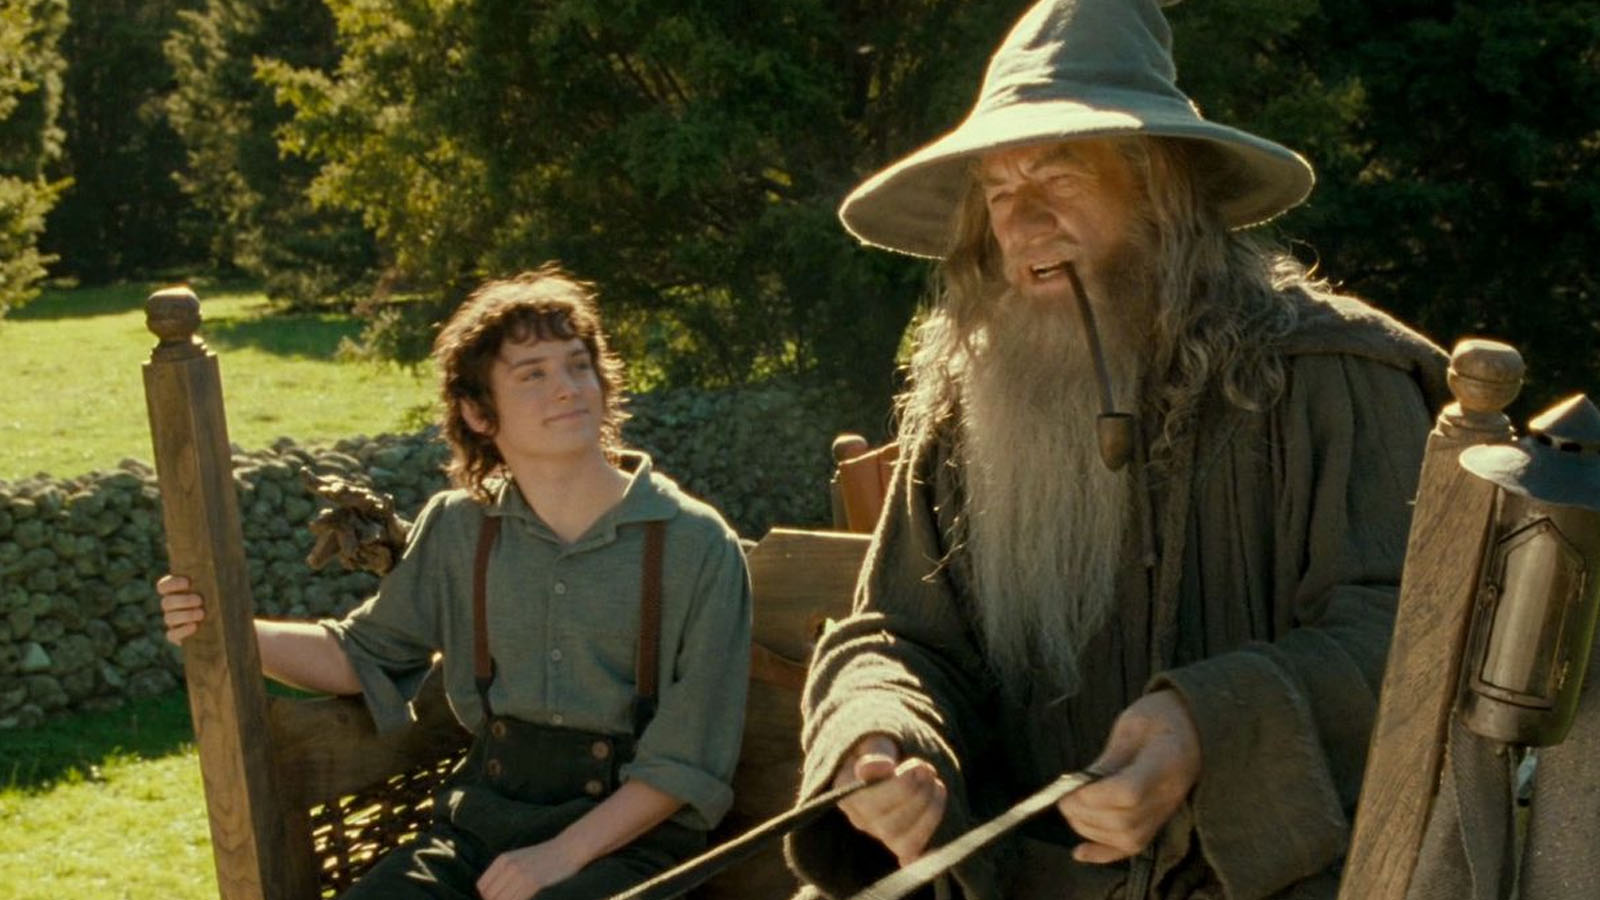 The Lord of the Rings Turns 20: Looking Back on an Epic Cinematic Legacy